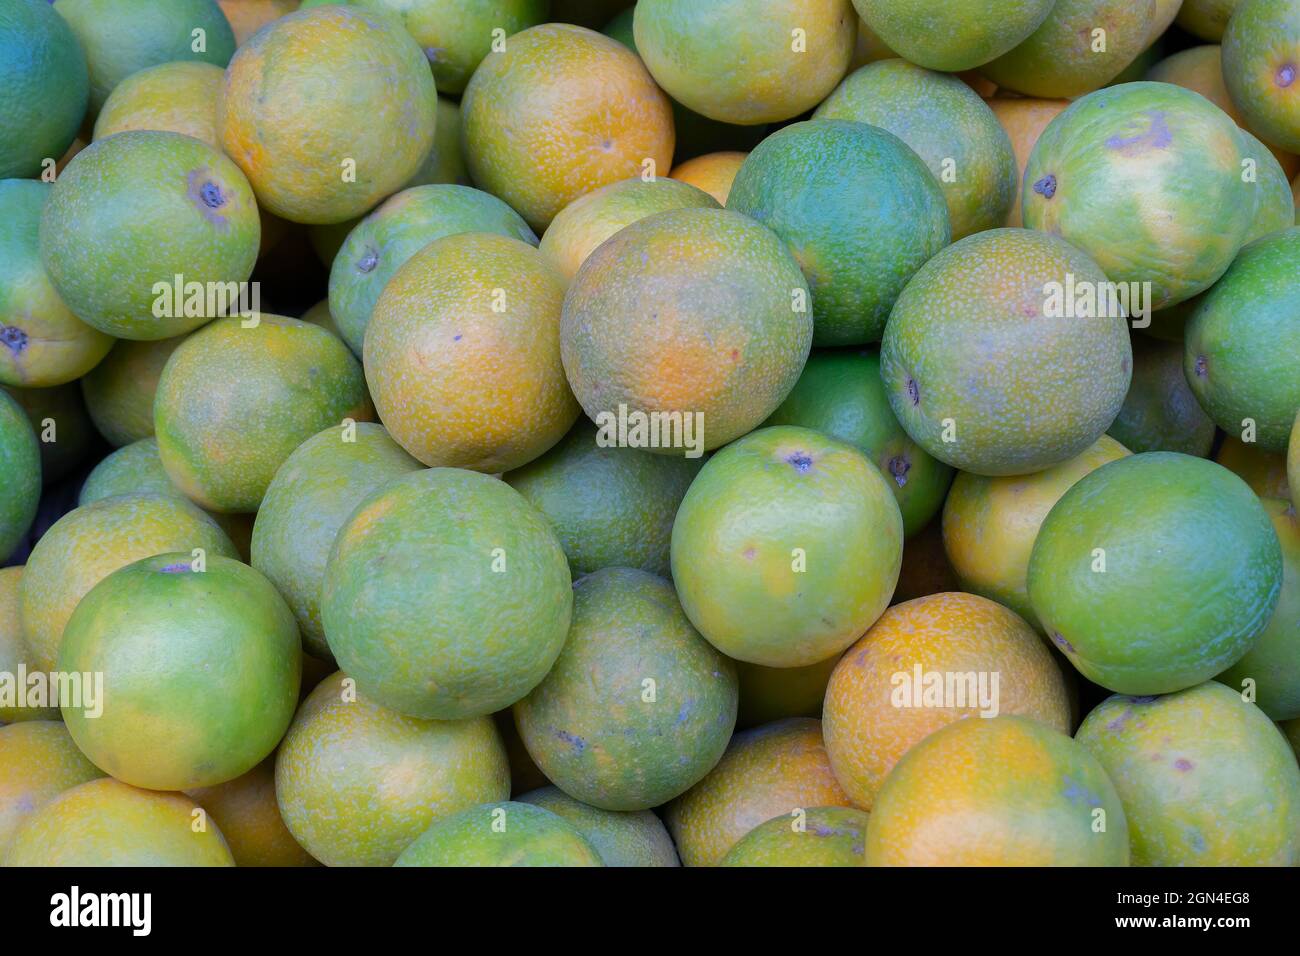 Citrus limetta, is a species of citrus, commonly known as mousambi, musambi, sweet lime or sweet lemon. Vegetables for sale in a market in Territy Baz Stock Photo